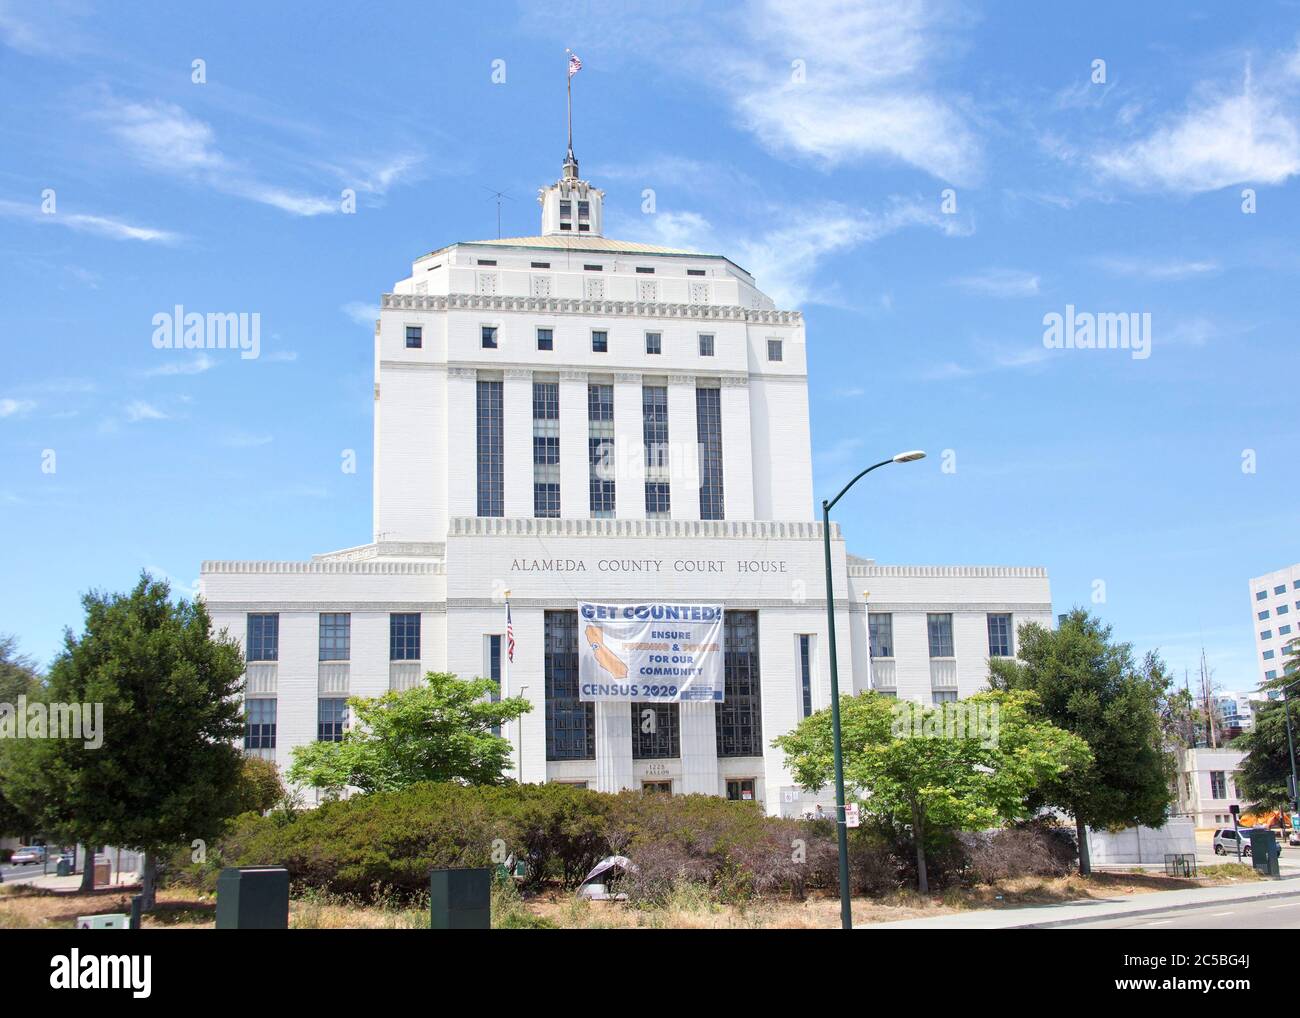 Oakland, CA - June 20: 2020: Alameda County Court house with Census 2020 sign hanging on the front. Tents in homeless encampment tucked into the bushe Stock Photo